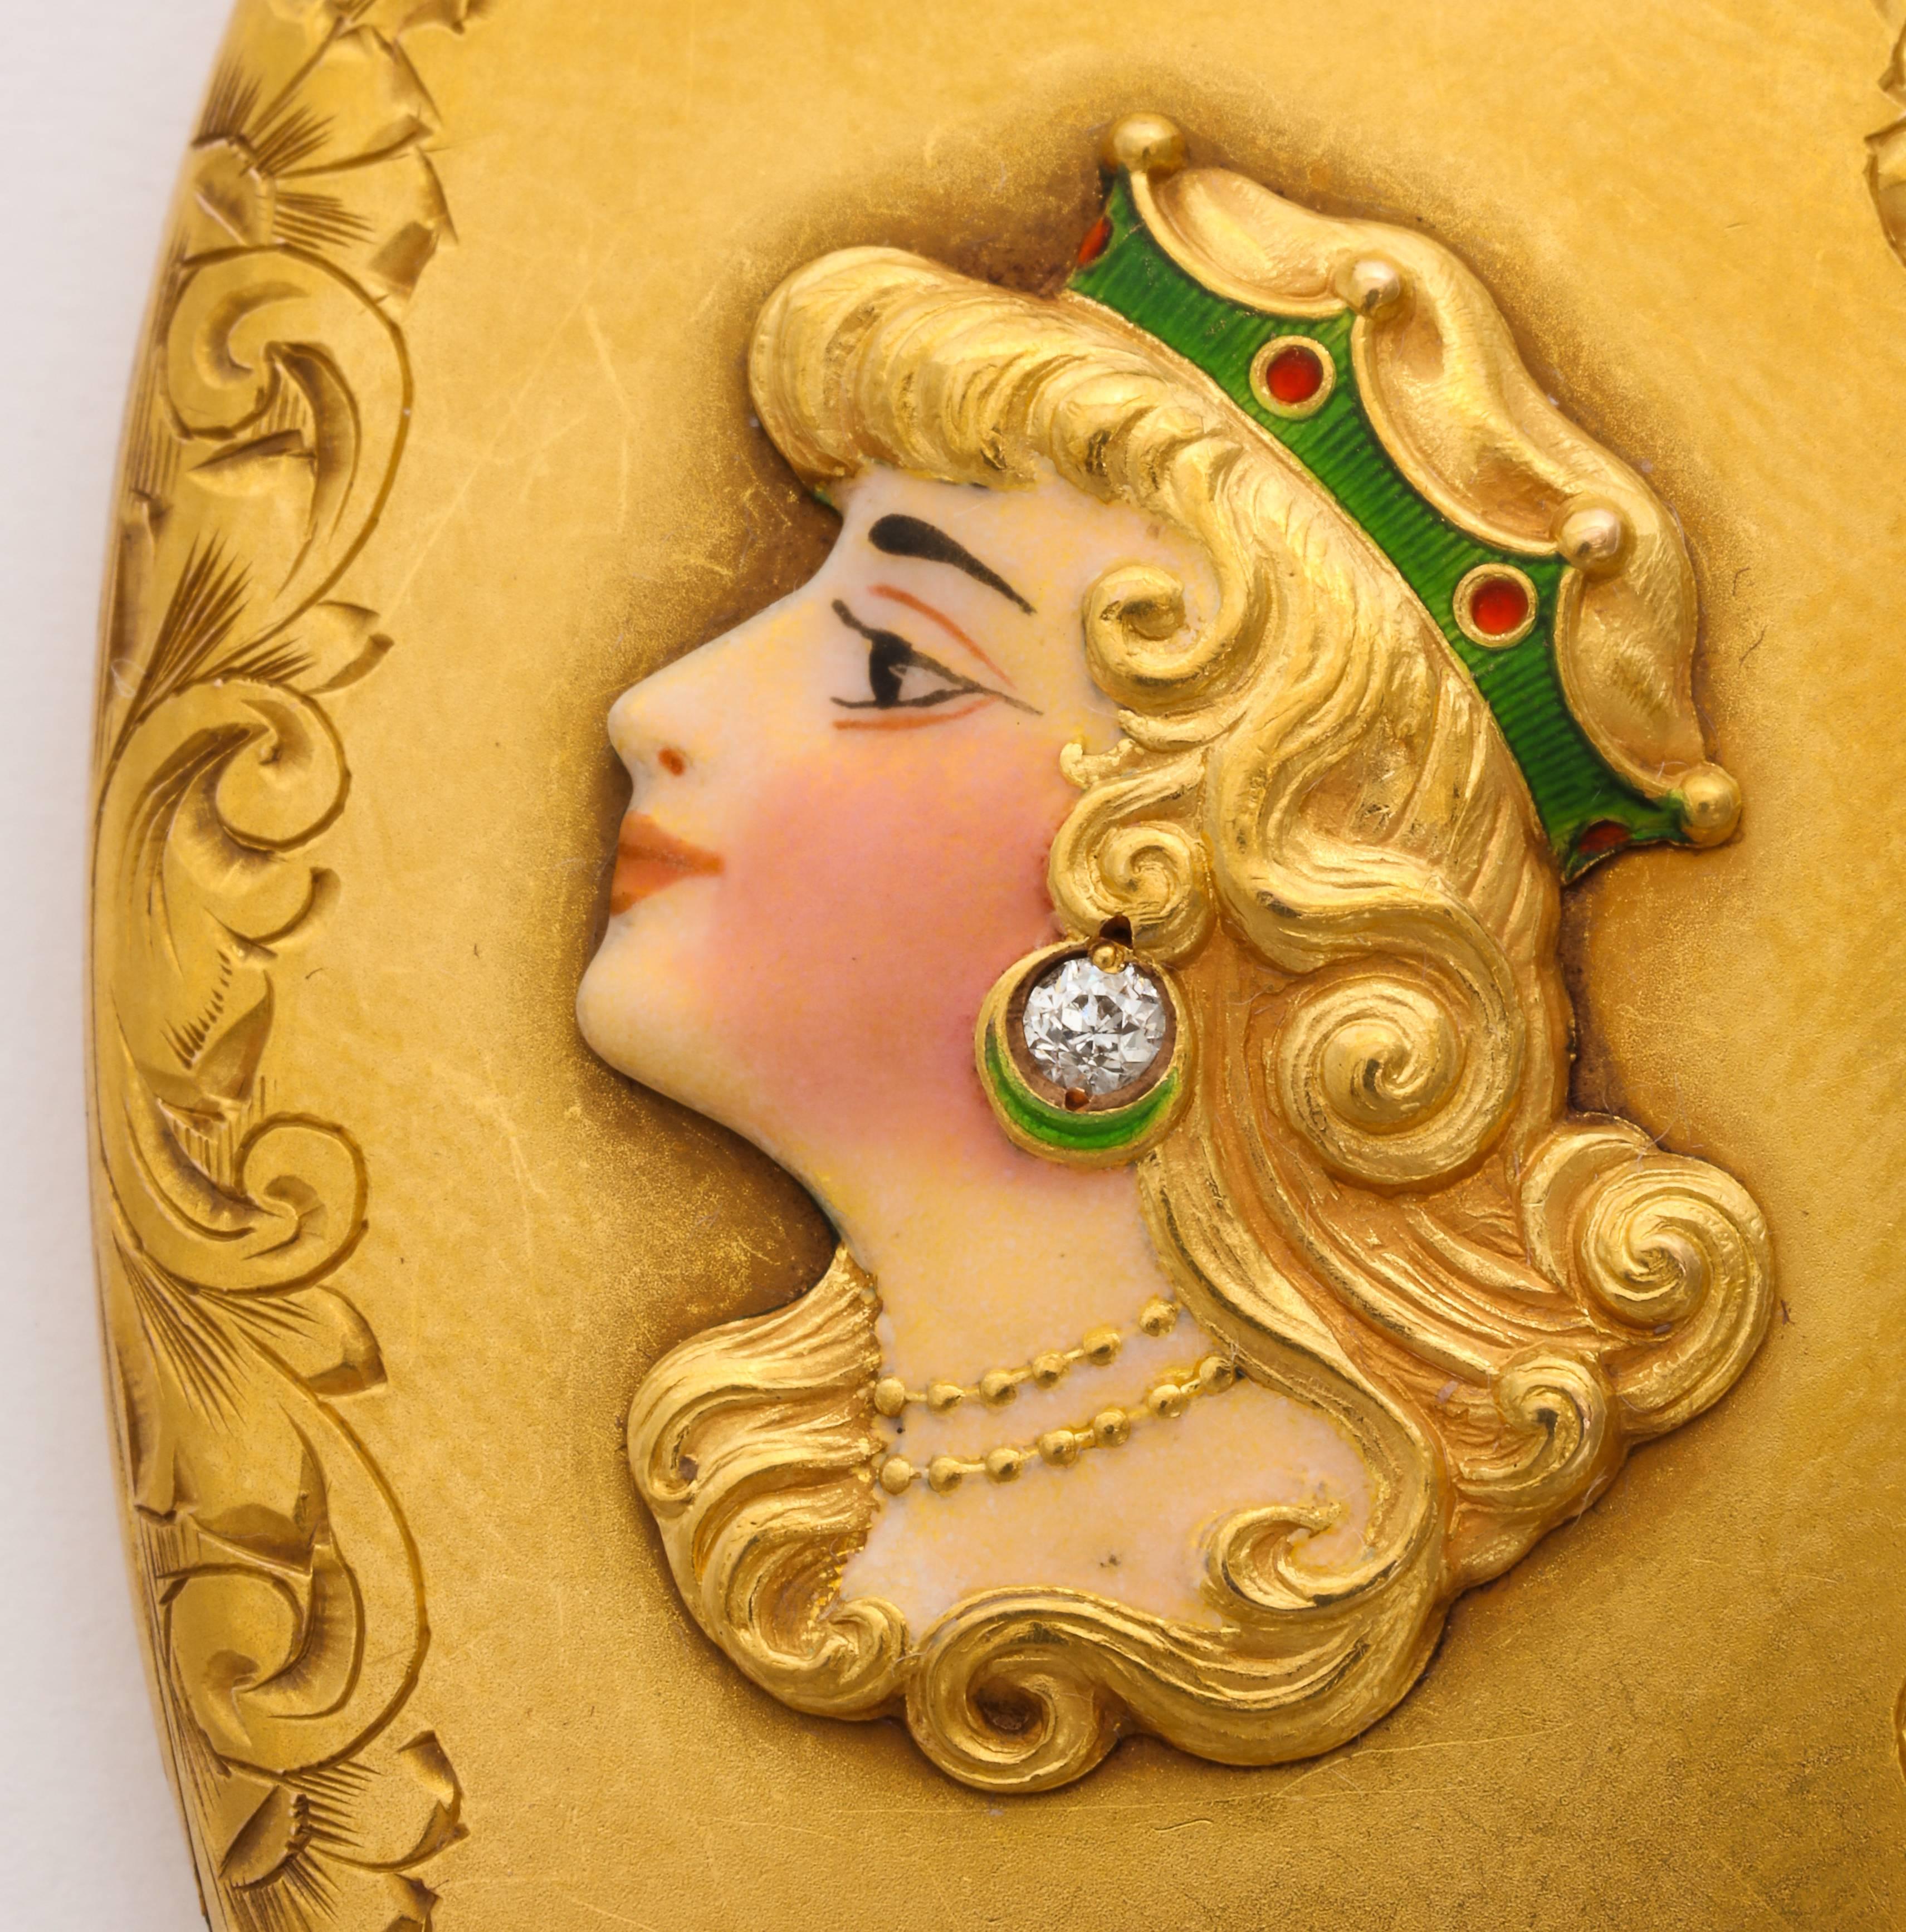 We offer this perfectly beautiful American Art Nouveau locket of 14K gold with edge engraved flowers and flourishes framing a 3-dimensional female image with diamond earring and enameled crown. The skin tone and blushed cheek is of a particular